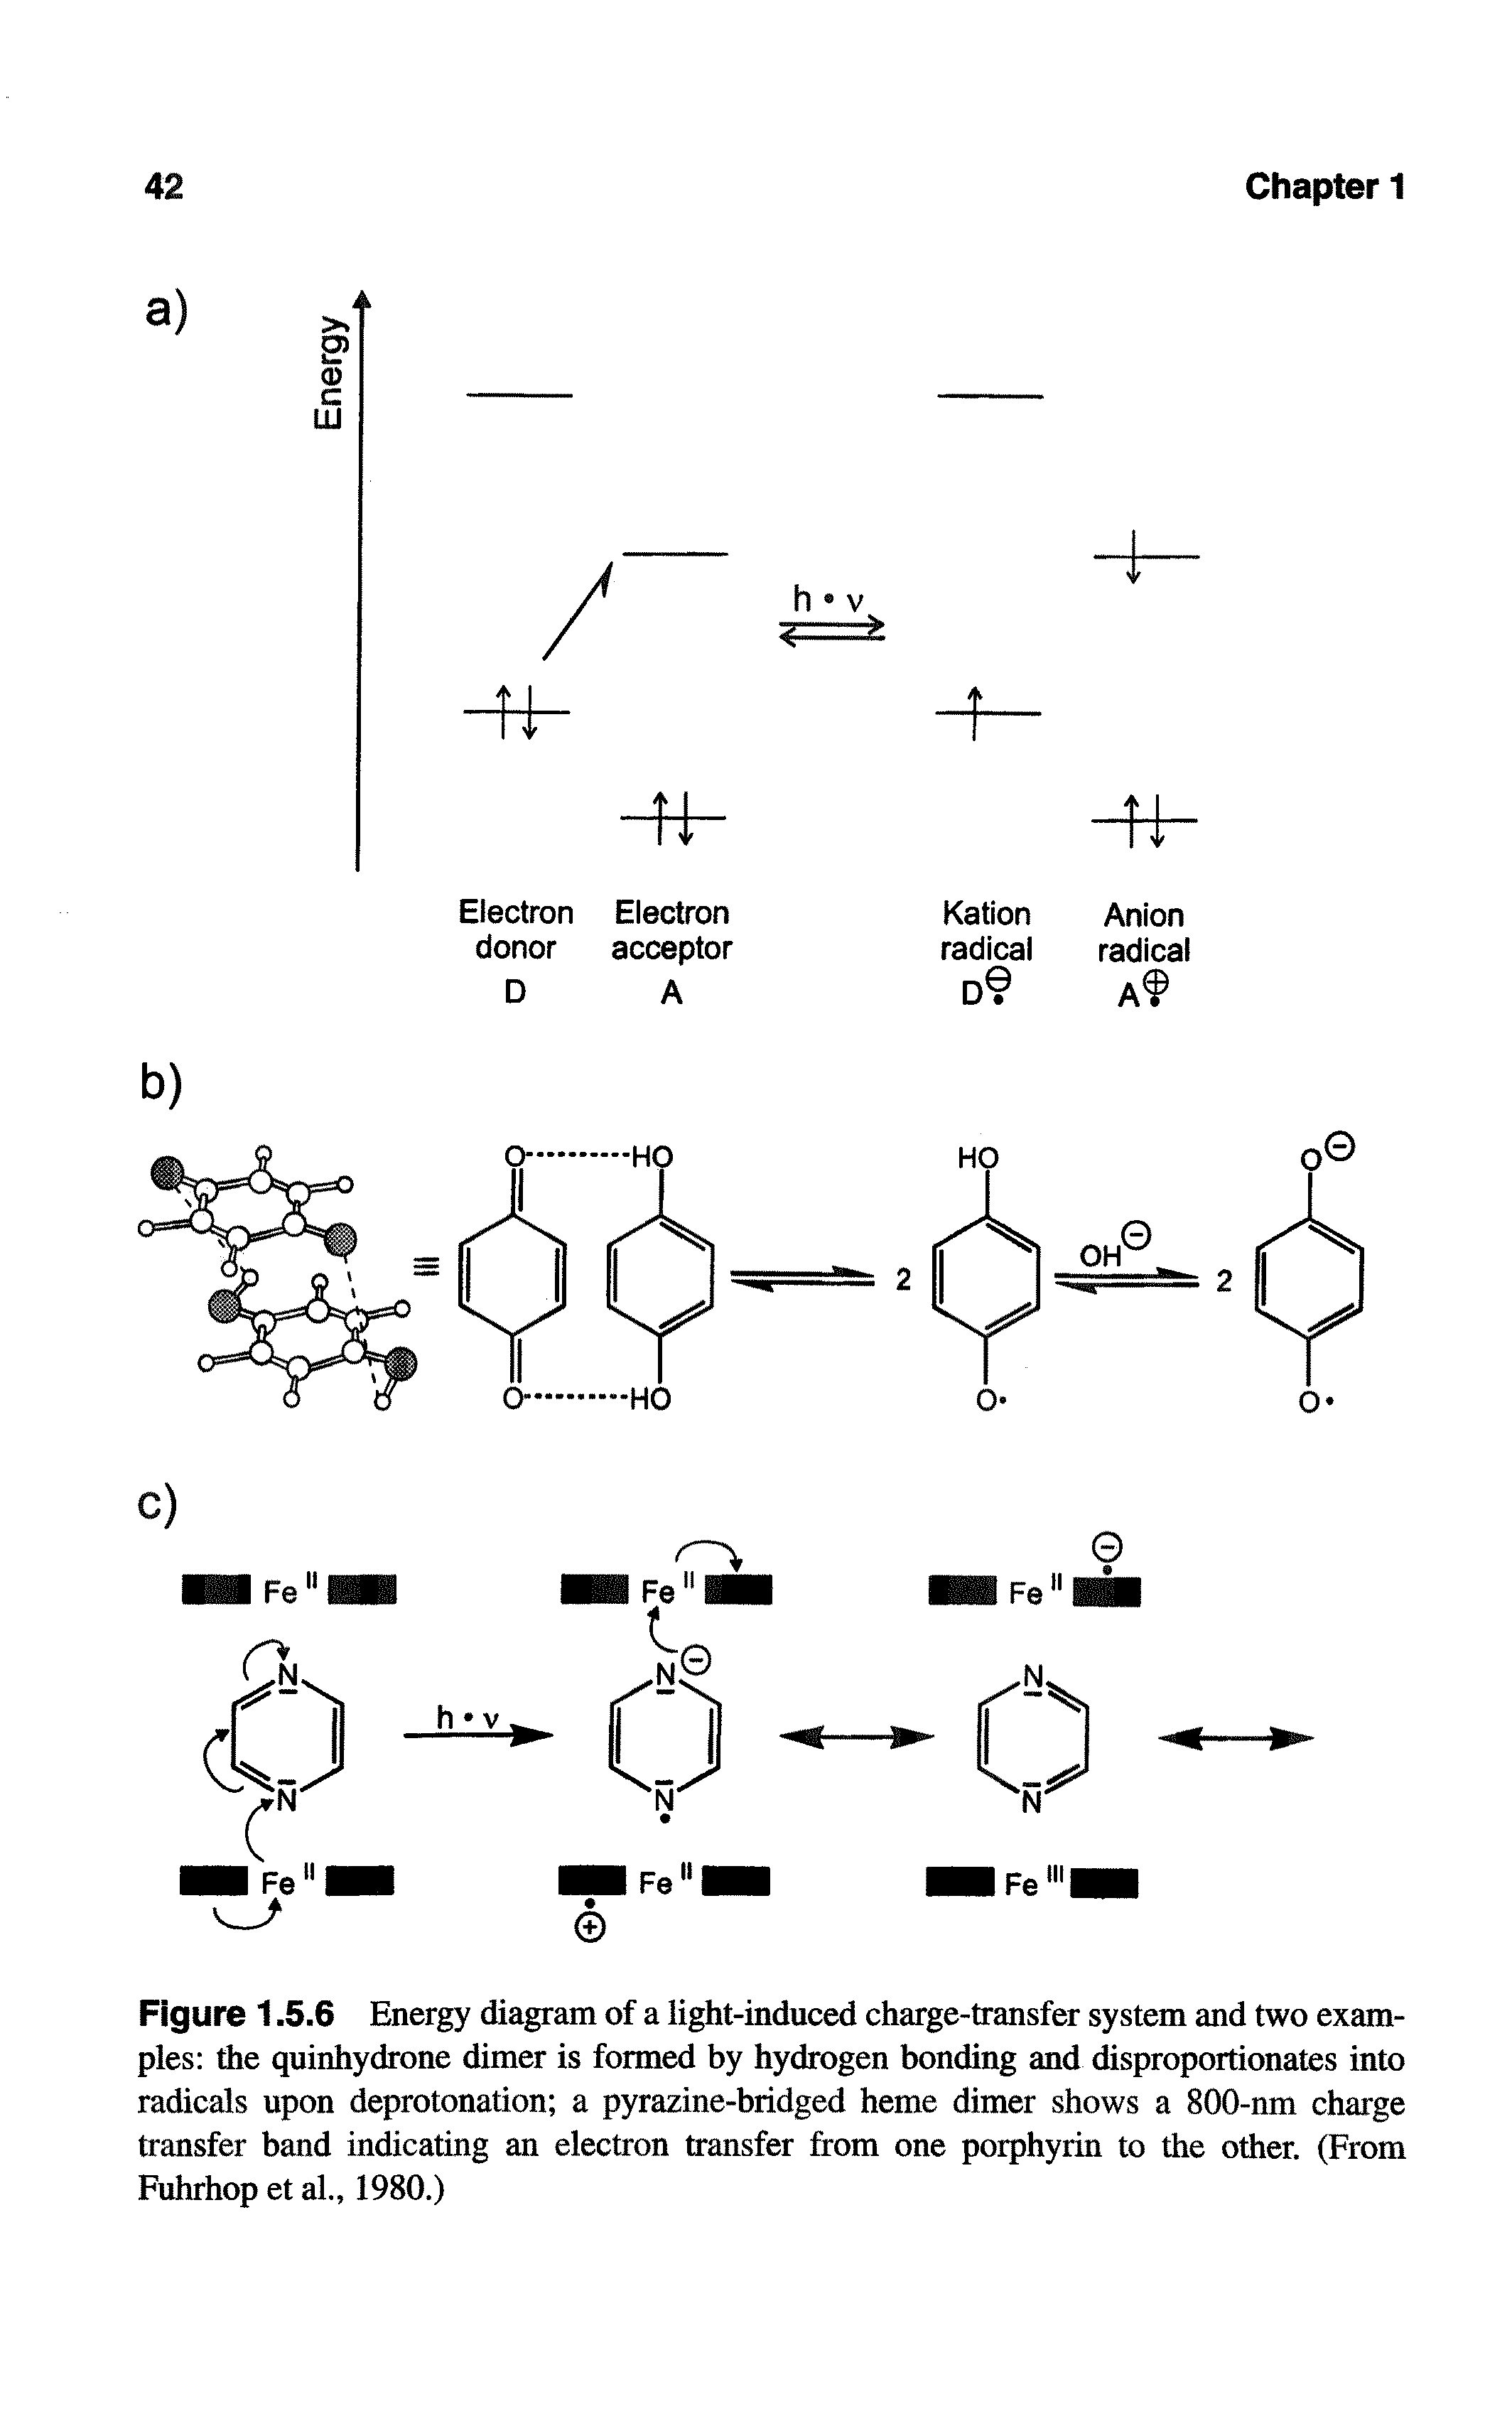 Figure 1.5.6 Energy diagram of a light-induced charge-transfer system and two examples the quinhydrone dimer is formed by hydrogen bonding and disproportionates into radicals upon deprotonation a pyrazine-bridged heme dimer shows a 800-nm charge transfer band indicating an electron transfer from one porphyrin to the other. (From Fuhrhop et al., 1980.)...